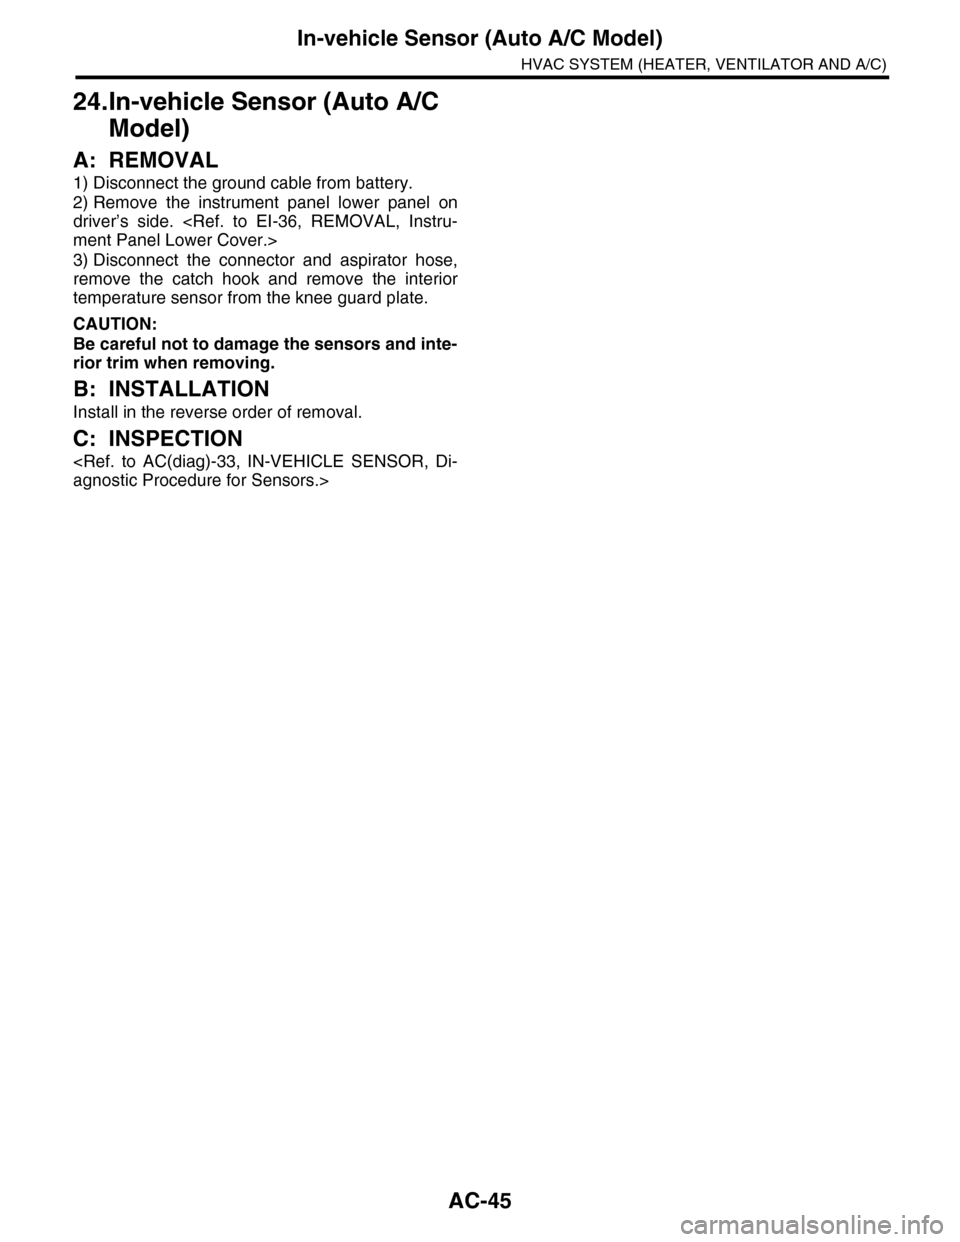 SUBARU TRIBECA 2009 1.G Service Manual PDF AC-45
In-vehicle Sensor (Auto A/C Model)
HVAC SYSTEM (HEATER, VENTILATOR AND A/C)
24.In-vehicle Sensor (Auto A/C 
Model)
A: REMOVAL
1) Disconnect the ground cable from battery.
2) Remove  the  instrum